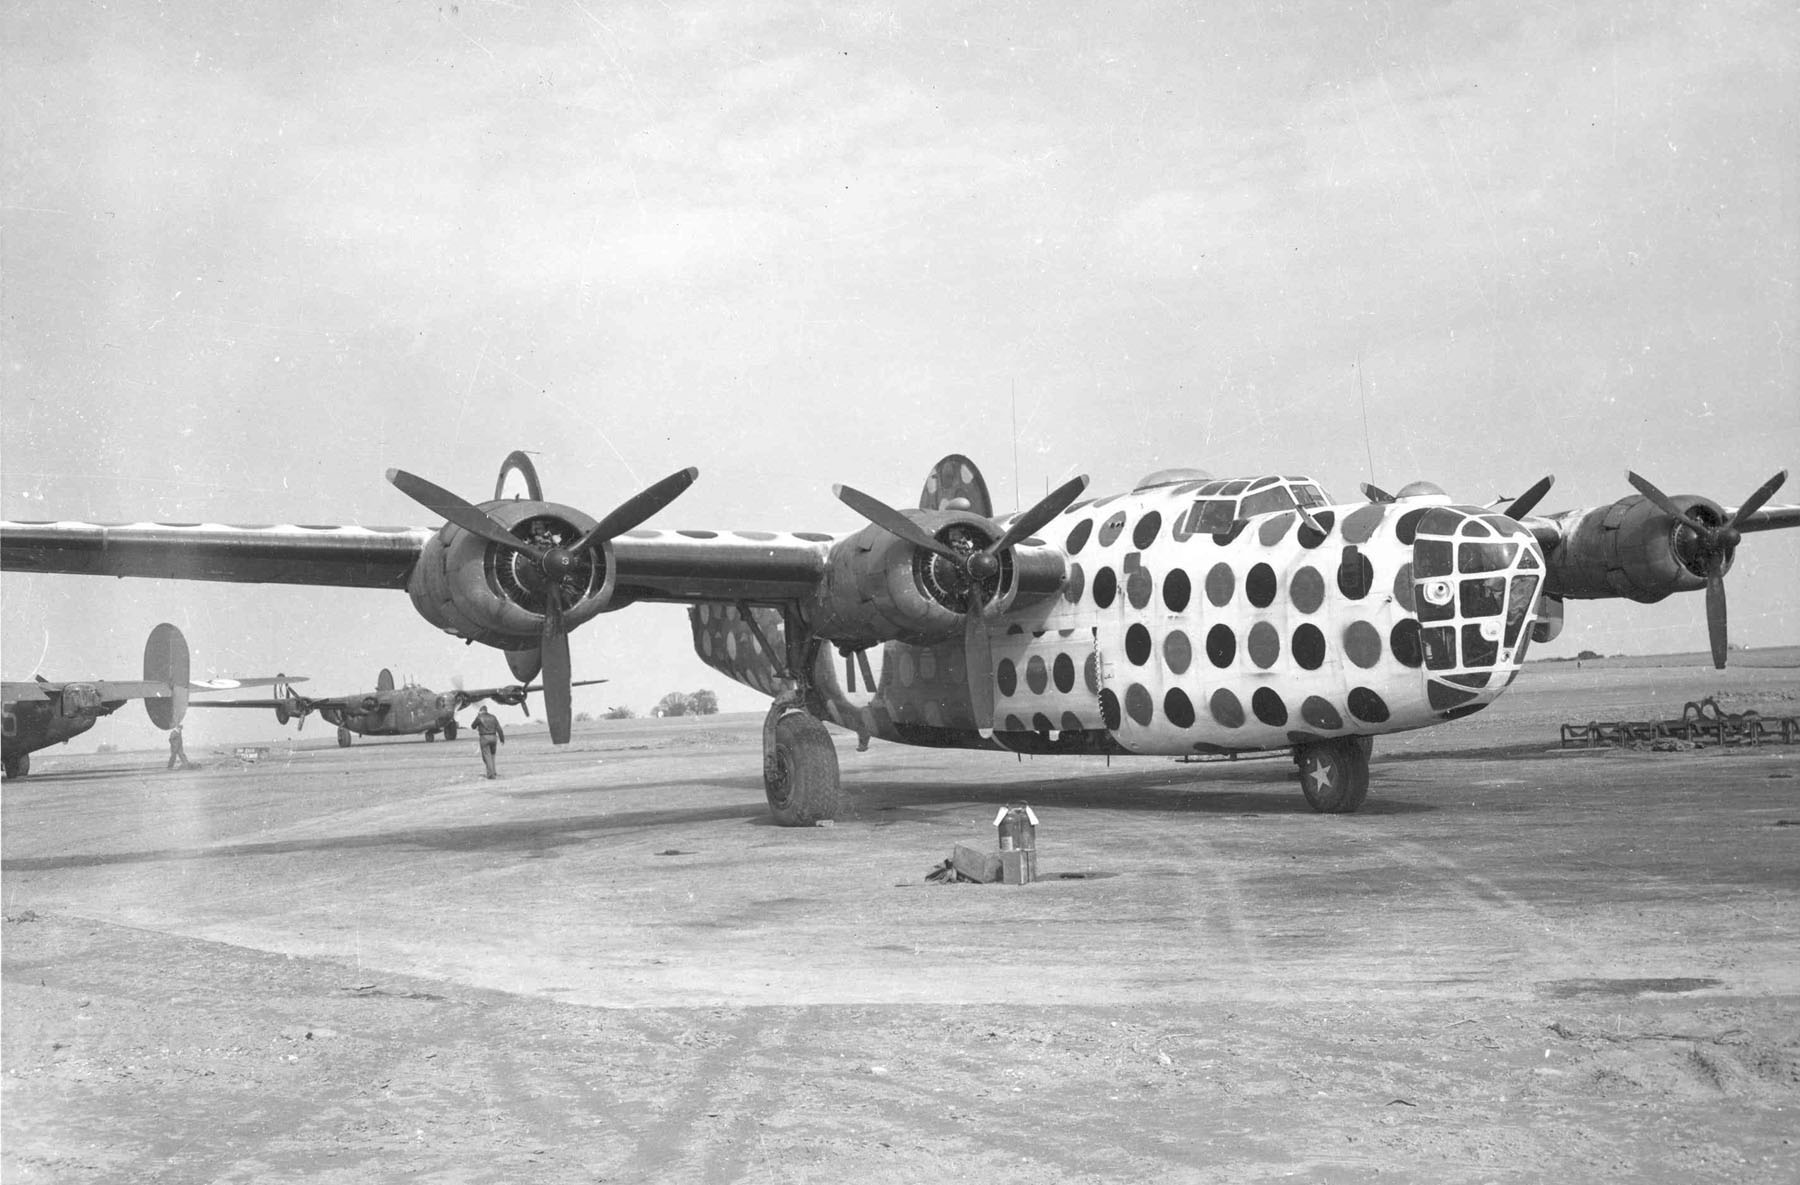 B-24D-30-CO Liberator assembly ship 'First Sergeant' of US 458th Bomber Group, RAF Horsham St. Faiths, Norfolk, England, United Kingdom, early 1944